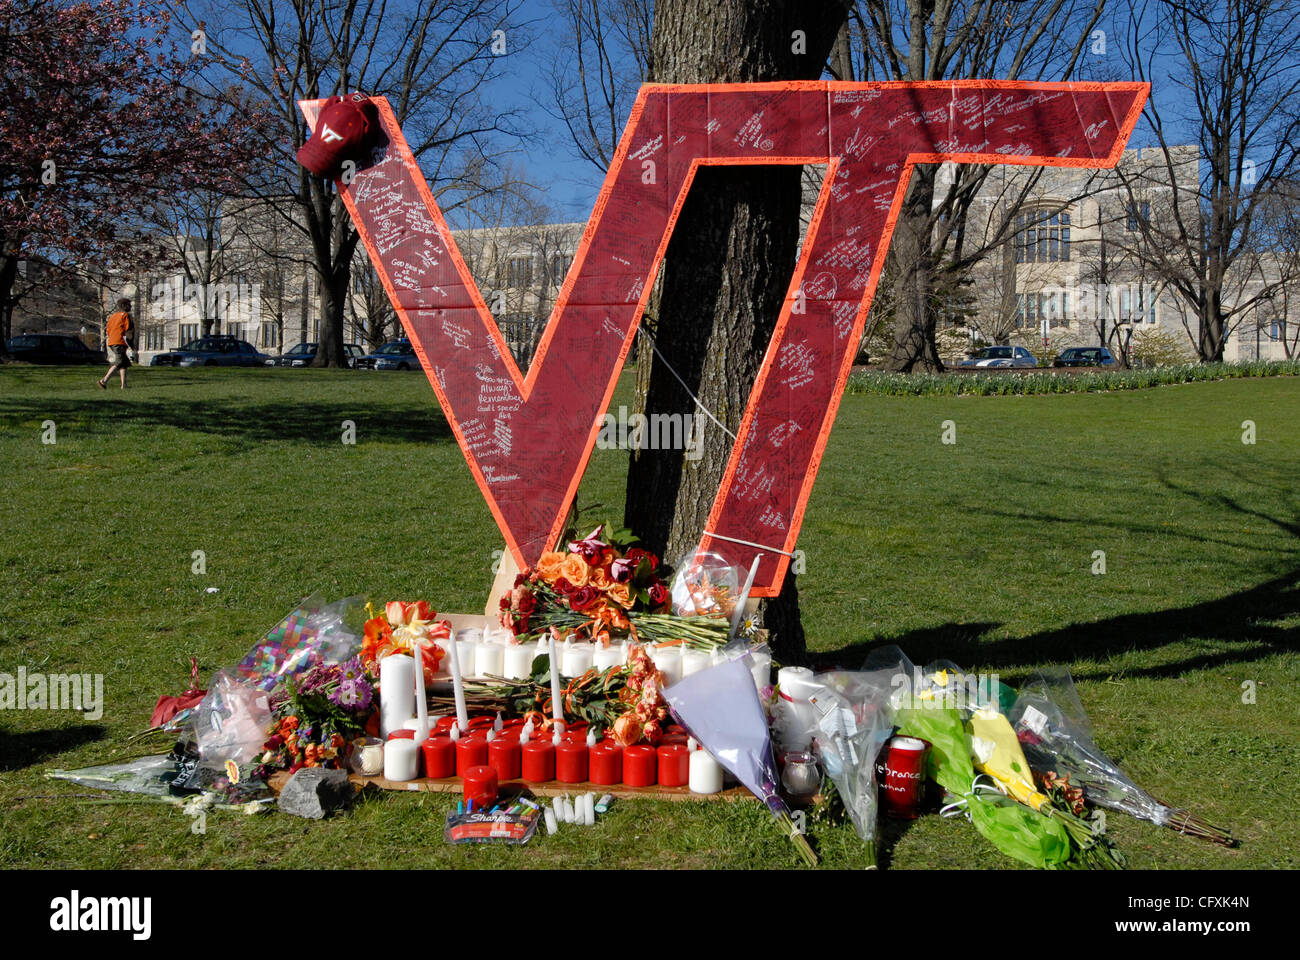 Apr 17, 2007 - Blacksburg, VA , USA - 24 hours after South Korean CHO SEUNG-HUI, a 23-year-old Virginia Tech Senior, English major gunned down 32 and then took his own life in the Virginia Tech massacre. The deadliest mass shooting in U.S. history and one of the worst ever. Cho in the USA since 1992 Stock Photo